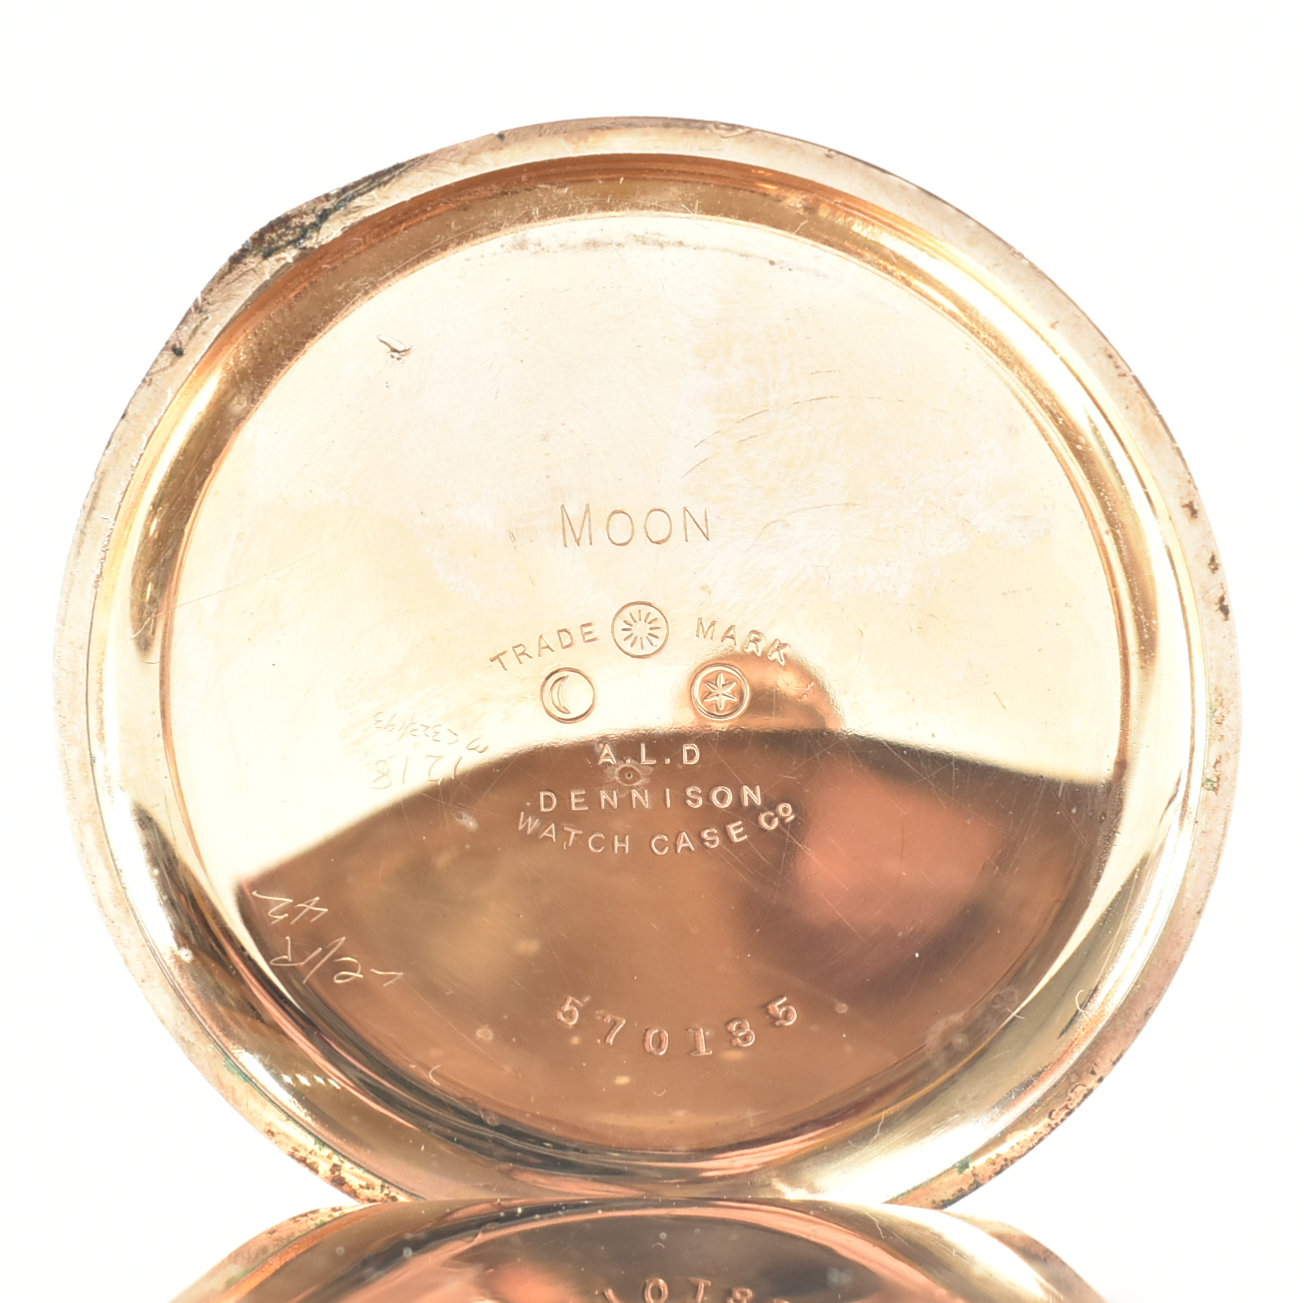 VINTAGE GOLD PLATED MOON POCKET WATCH - Image 7 of 9